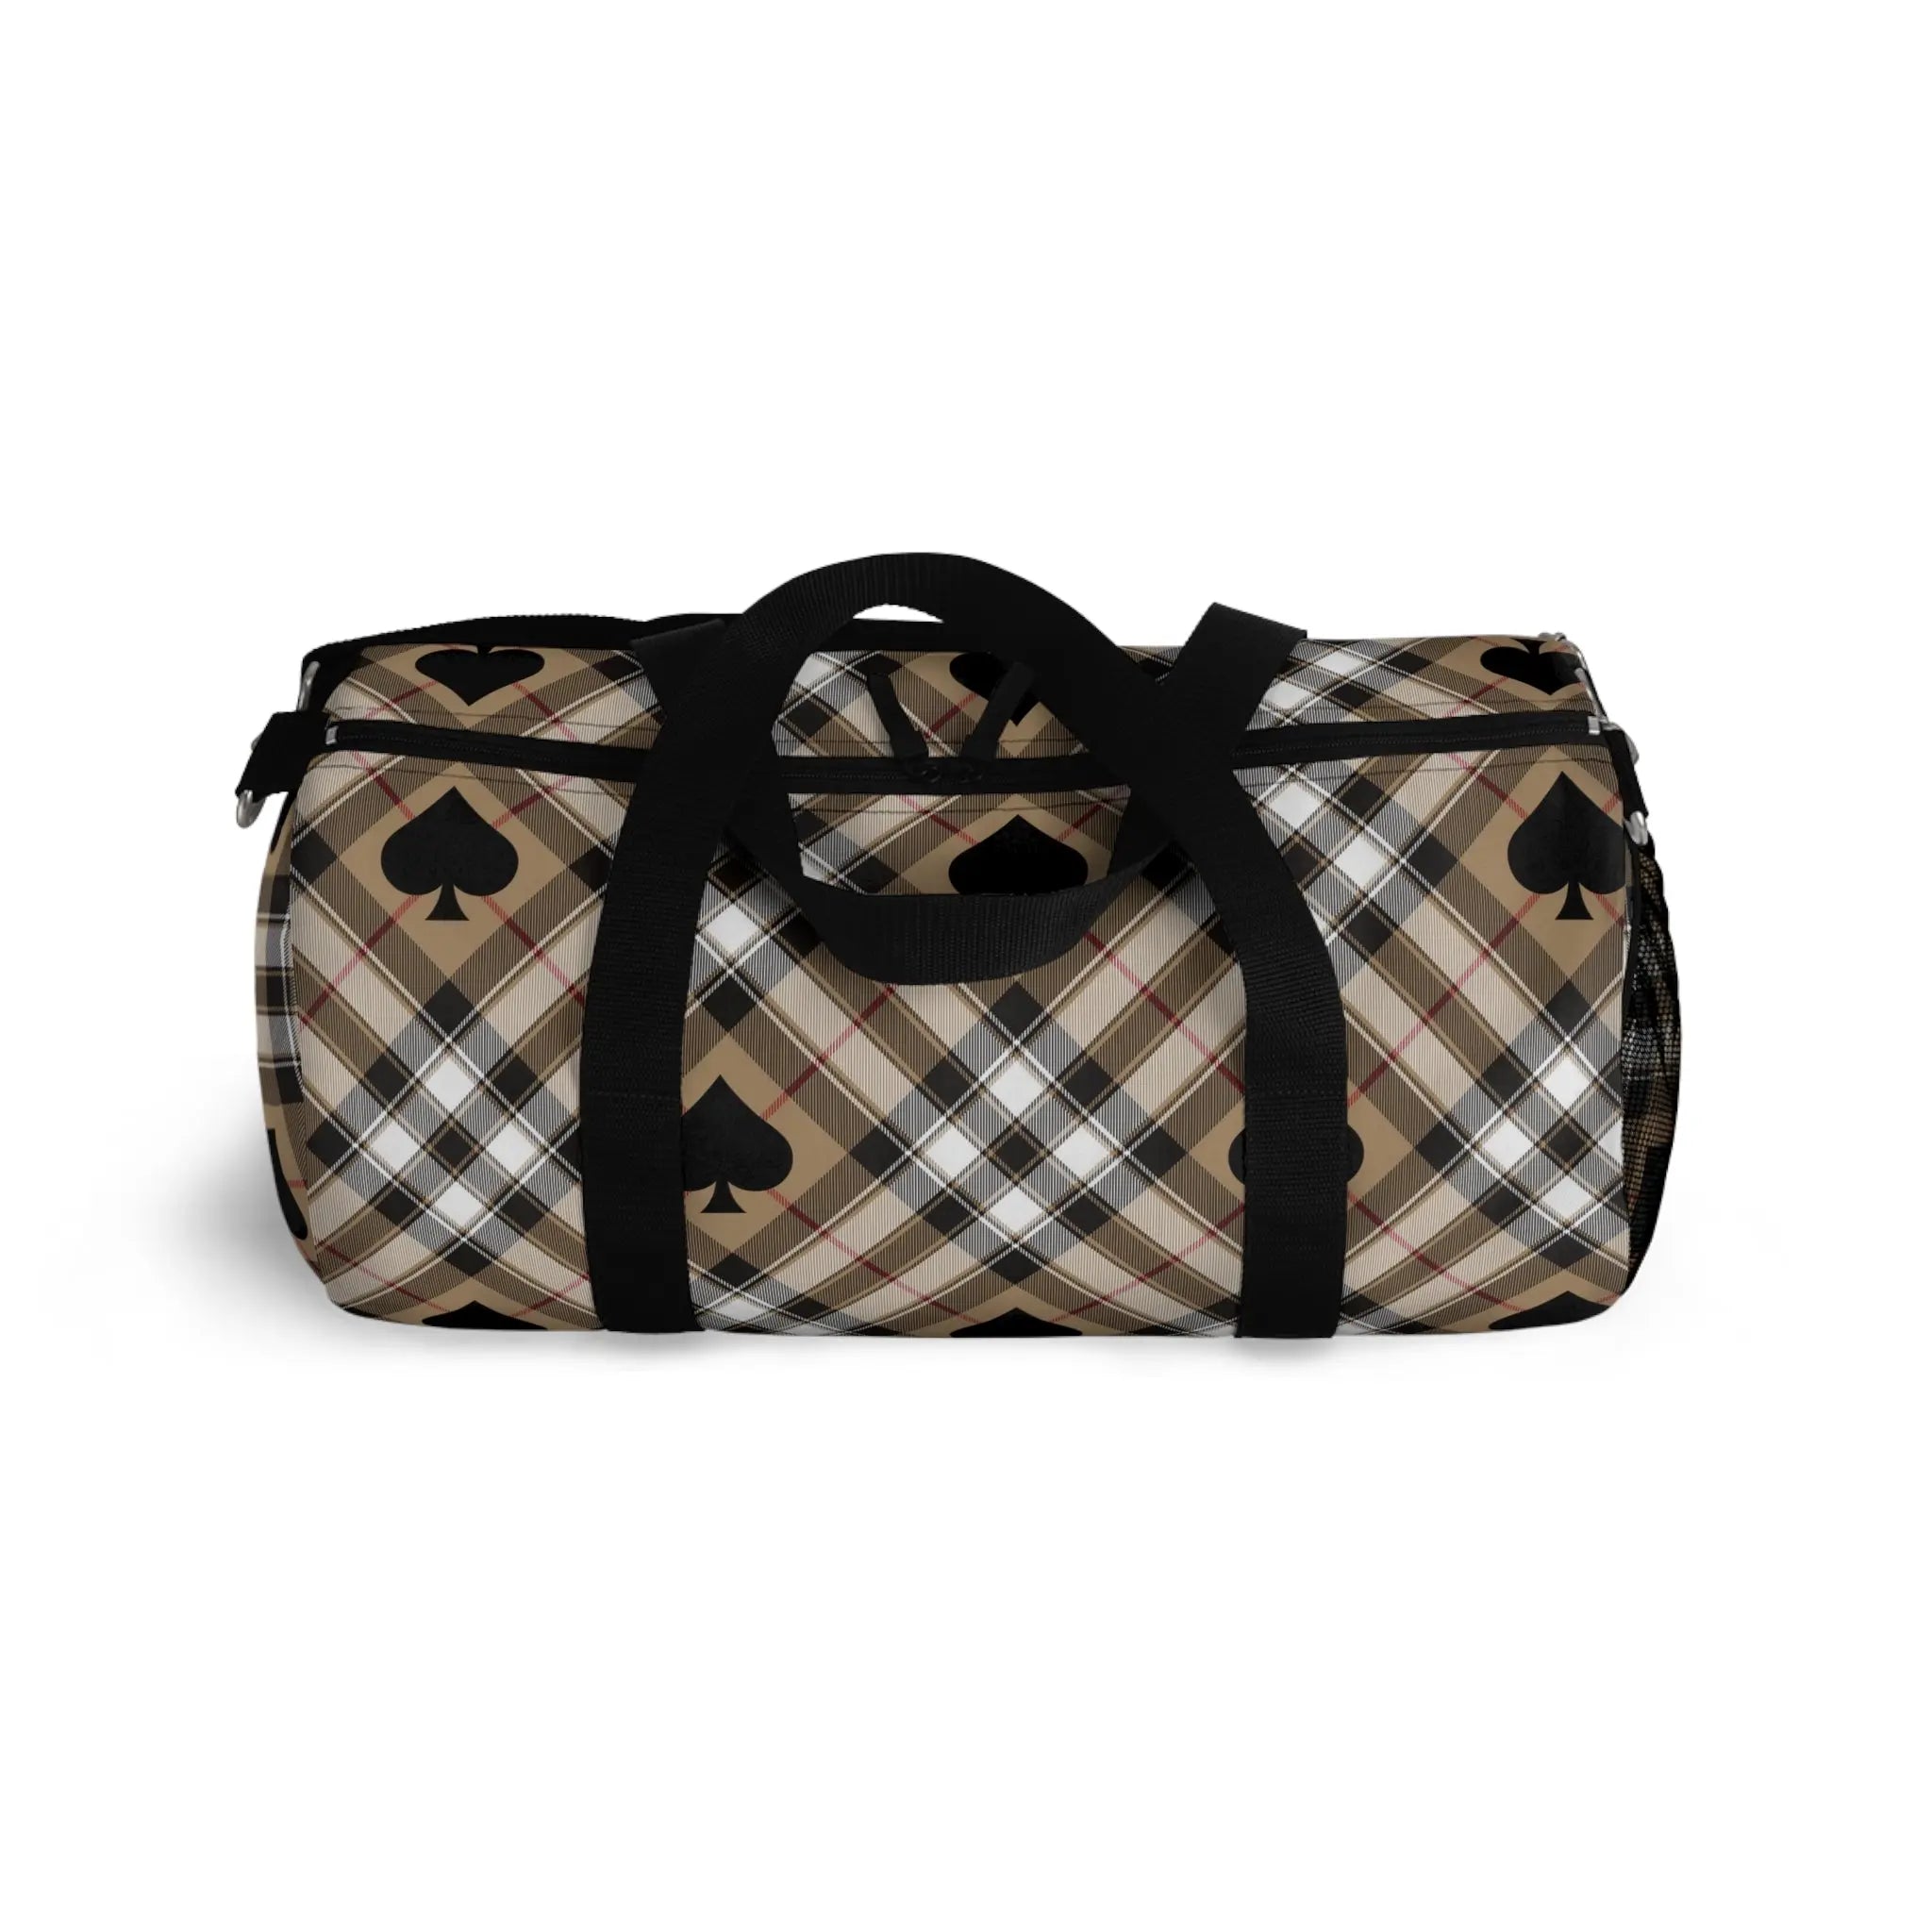  Abby Beige Ace of Spades Duffel Bag, Travel and Overnight Bag Bags